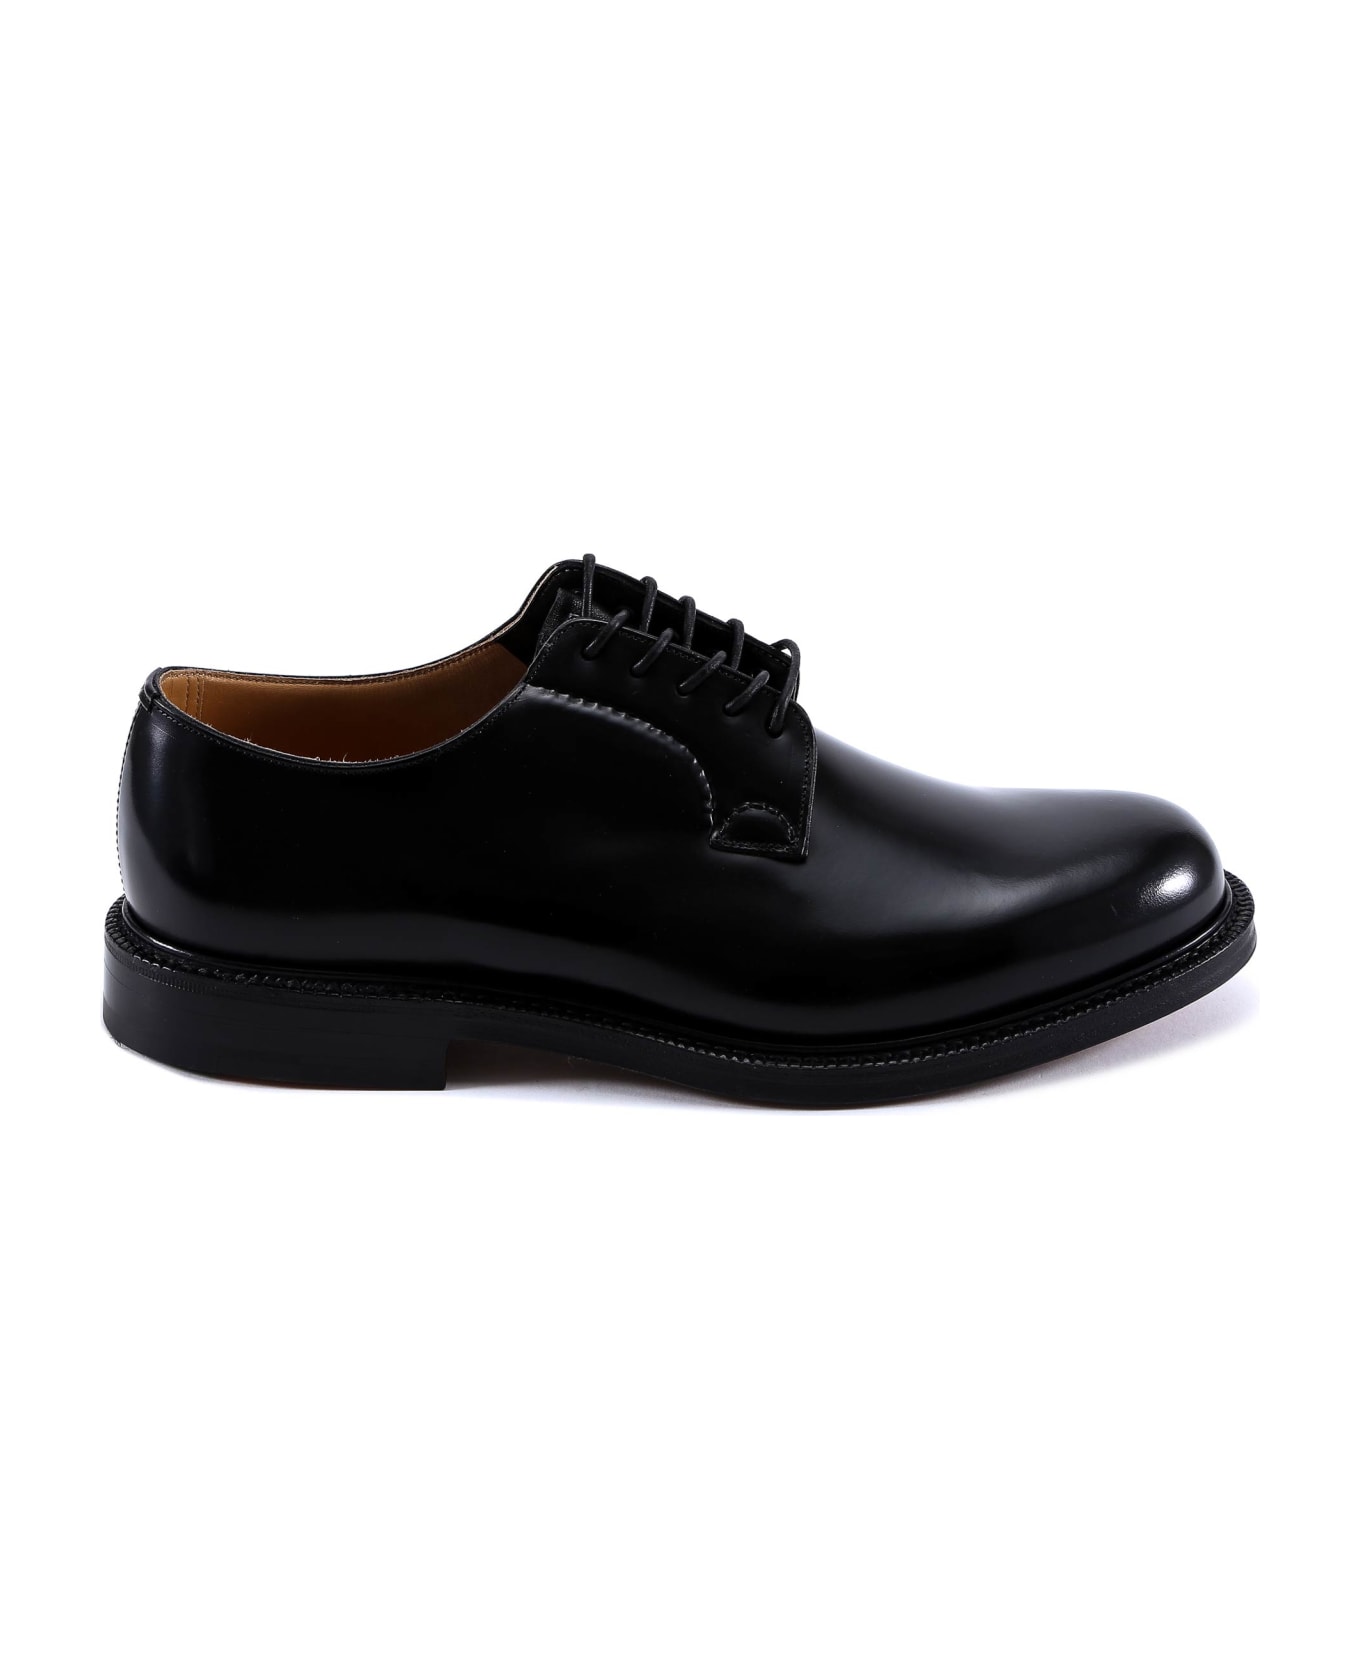 Church's Shannon Derby Shoes Laced Shoes - NERO ローファー＆デッキシューズ